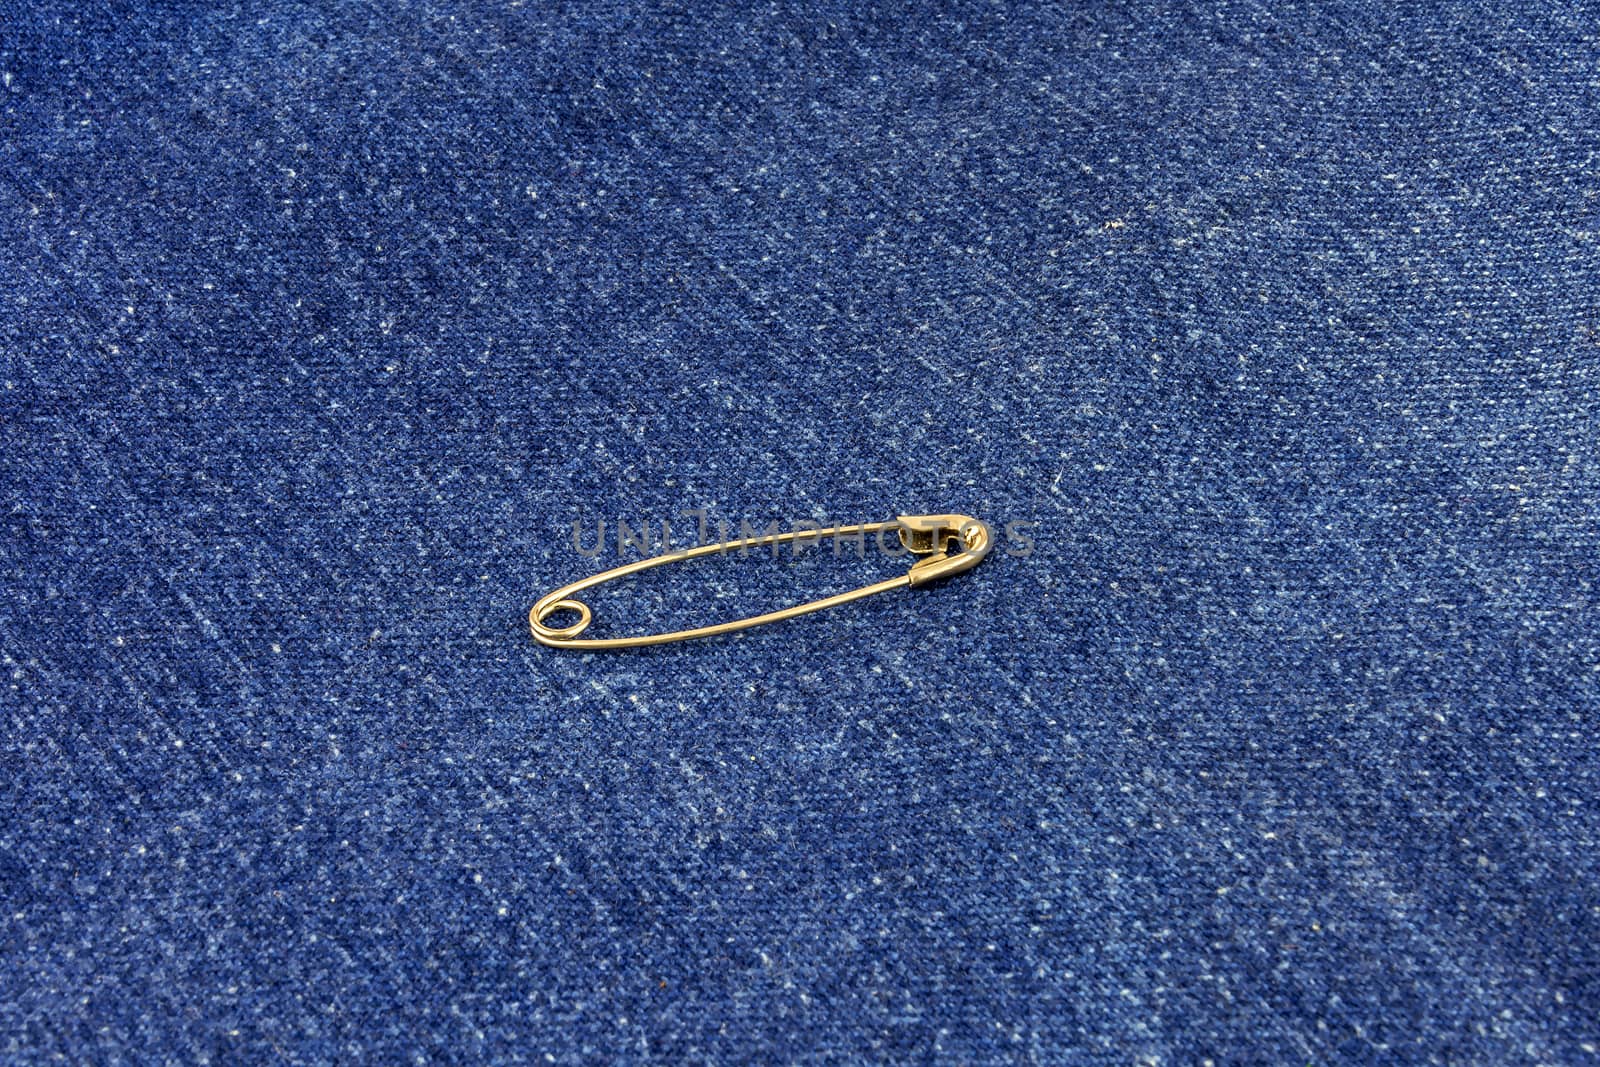 Metal buttoned pin lies on blue jeans material